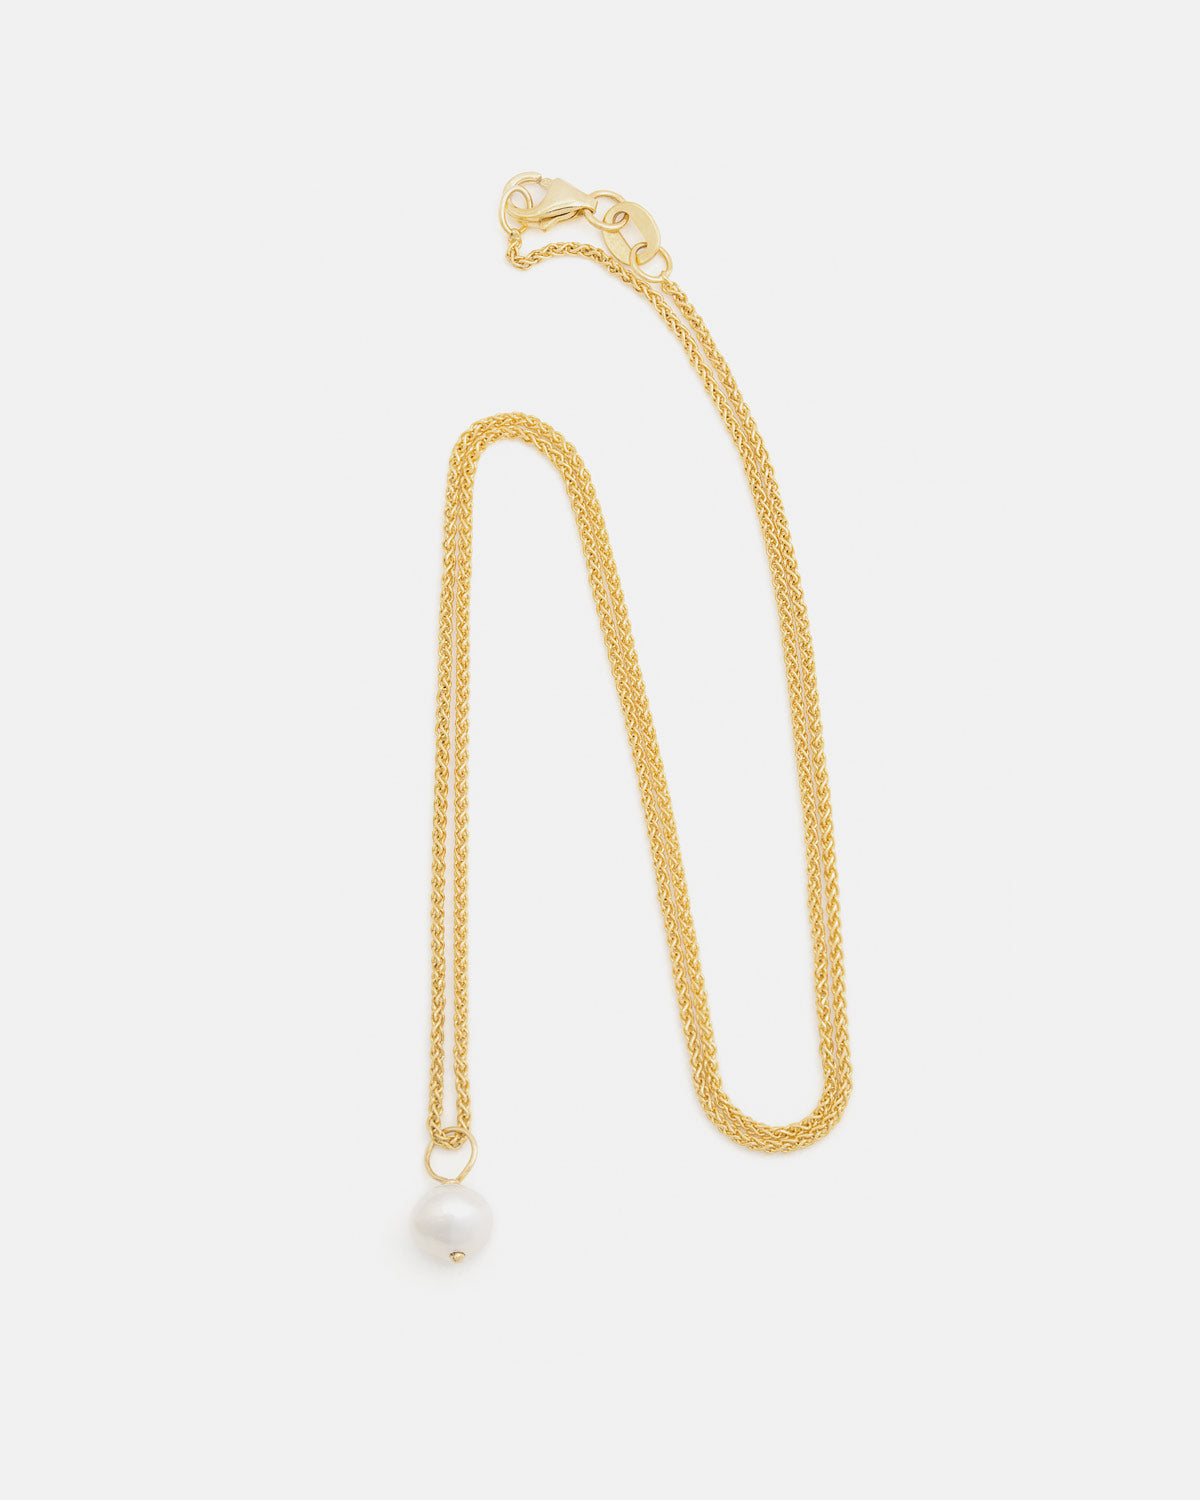 Pom-pom Pendant in Yellow Gold with White Pearl